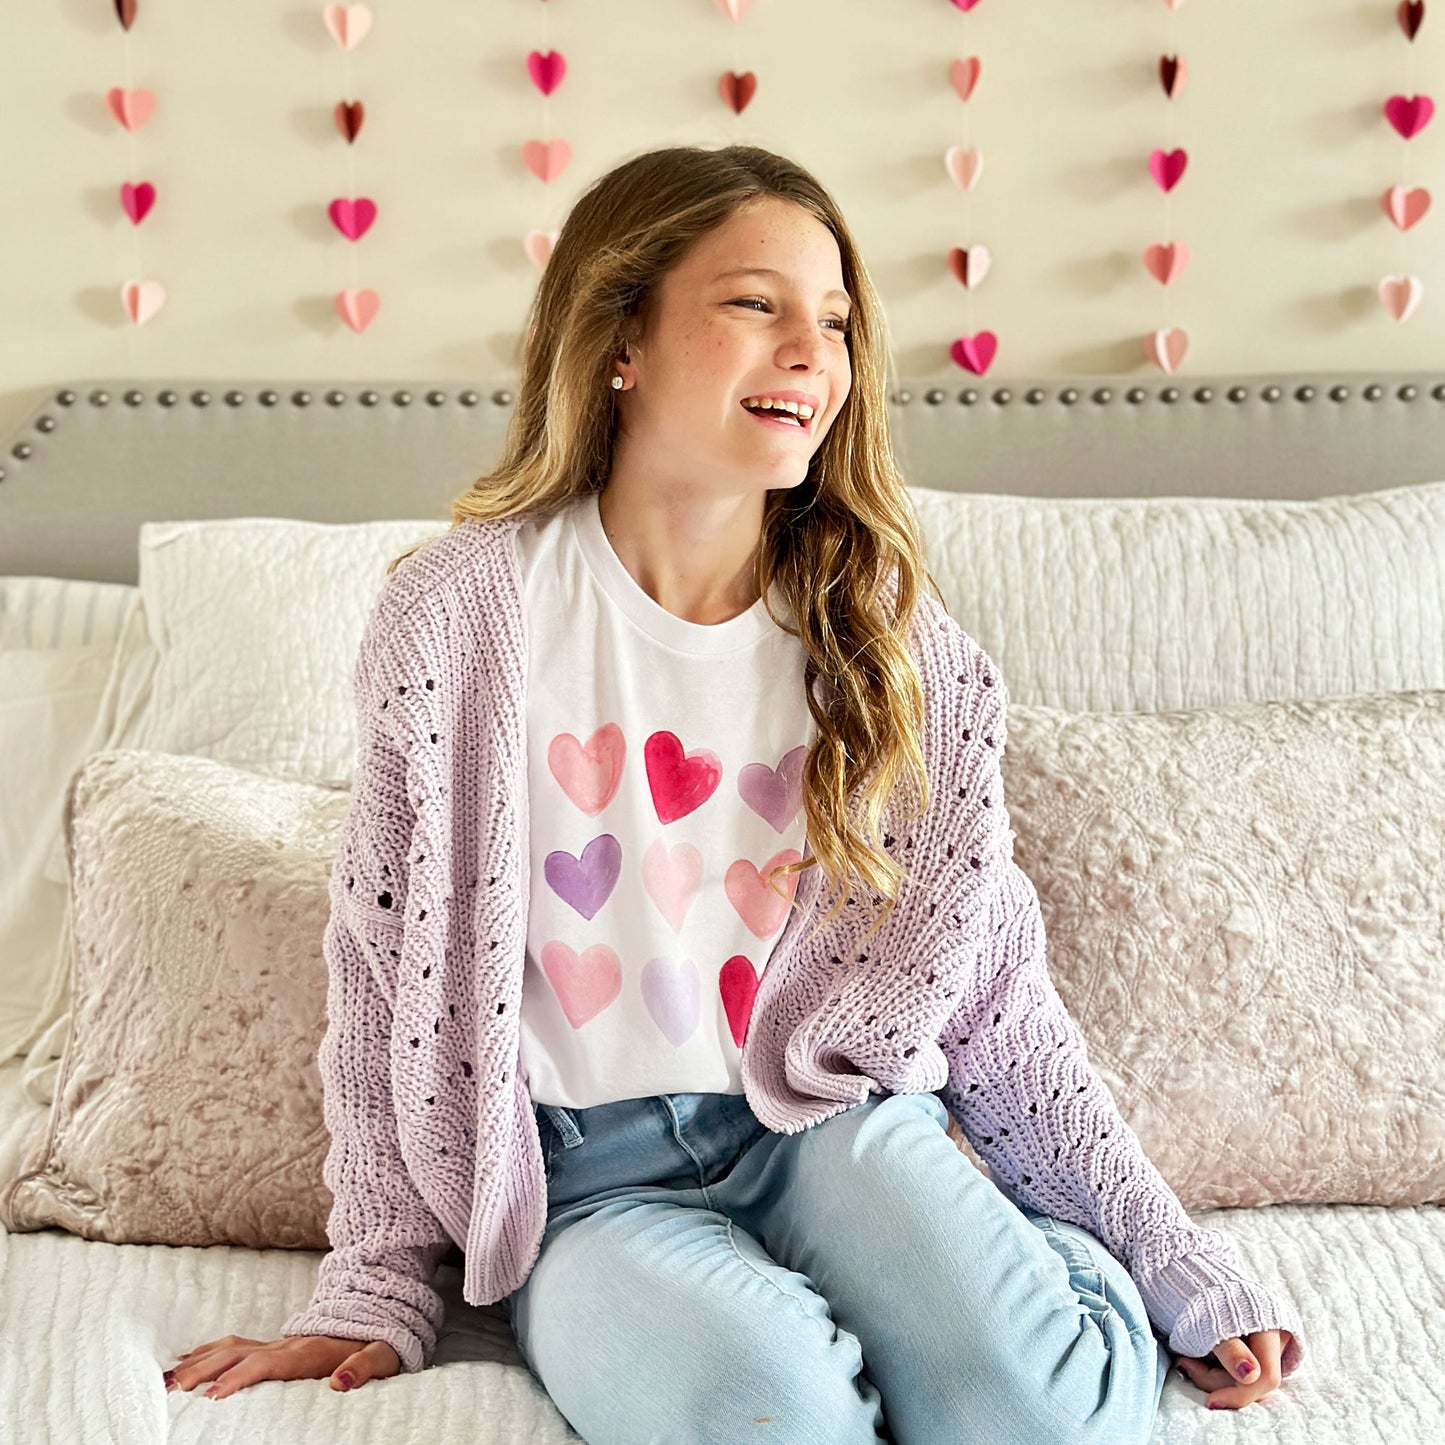 Little girl laughing, wearing a valentine's day themed tee with a colorful watercolor heart design